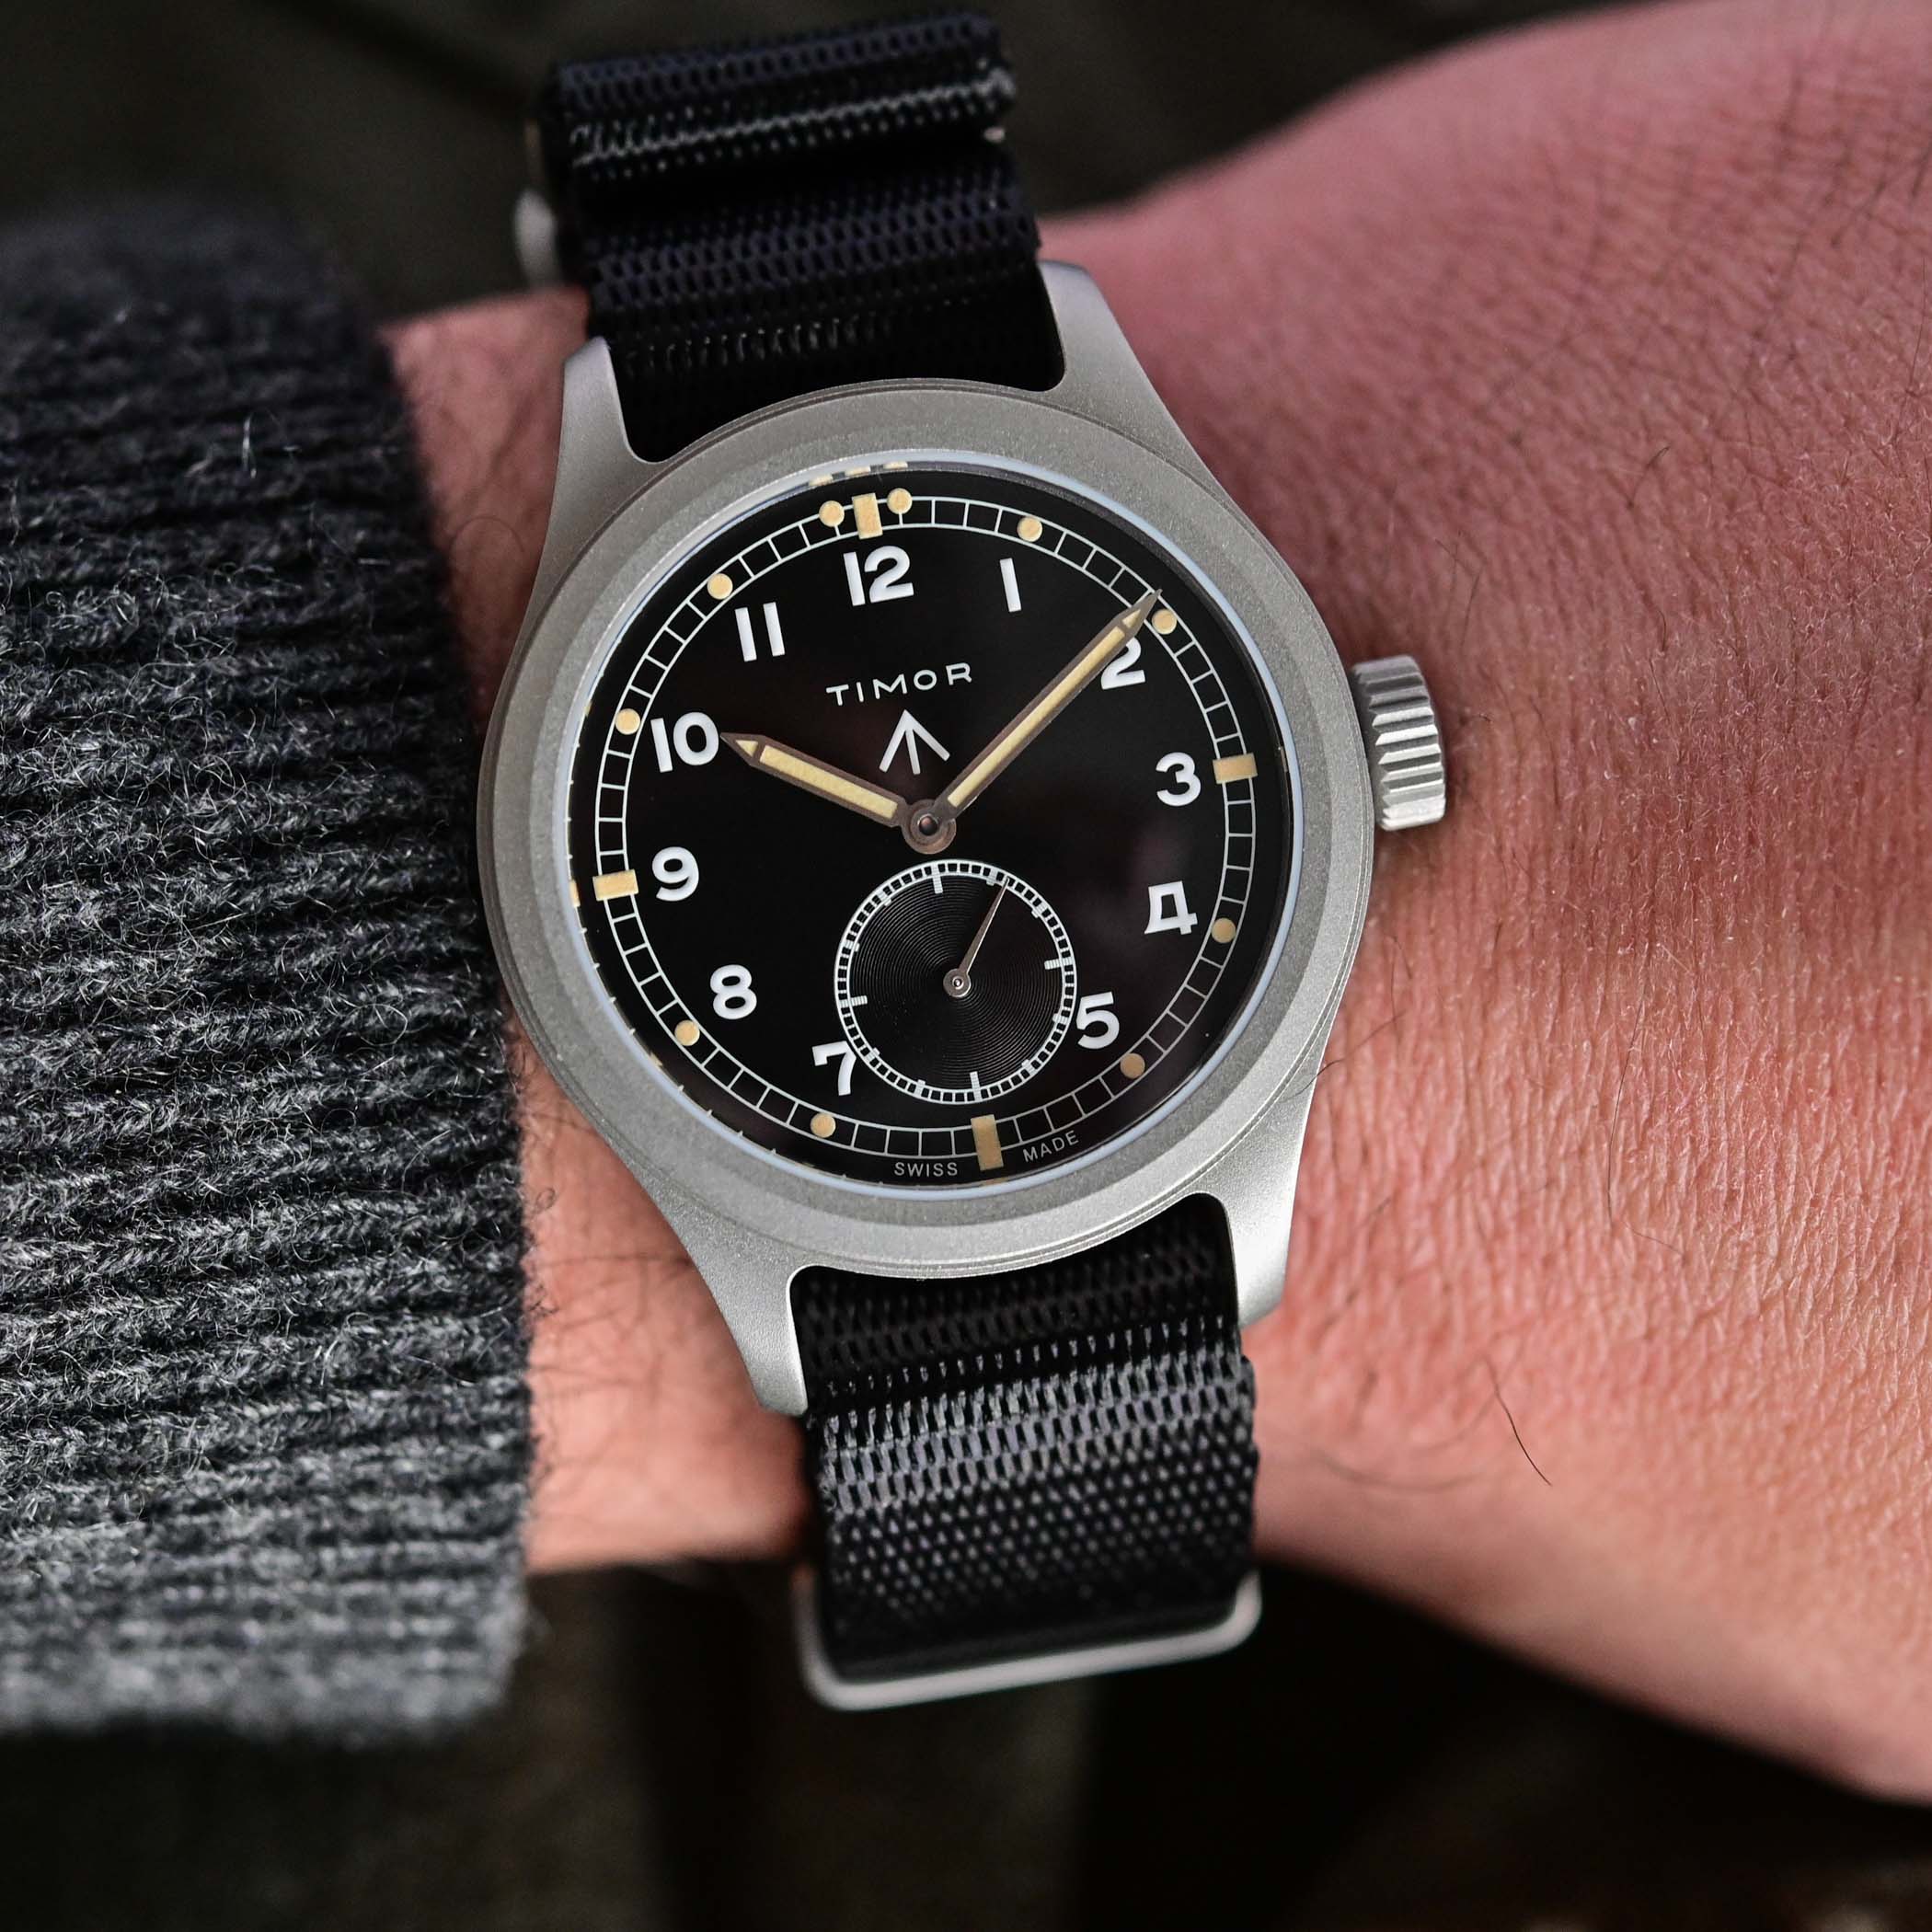 battle of accessible British military-inspired watches - comparative review Hamilton Khaki Pilot Pioneer Mechanical versus Timor Heritage Field - 2